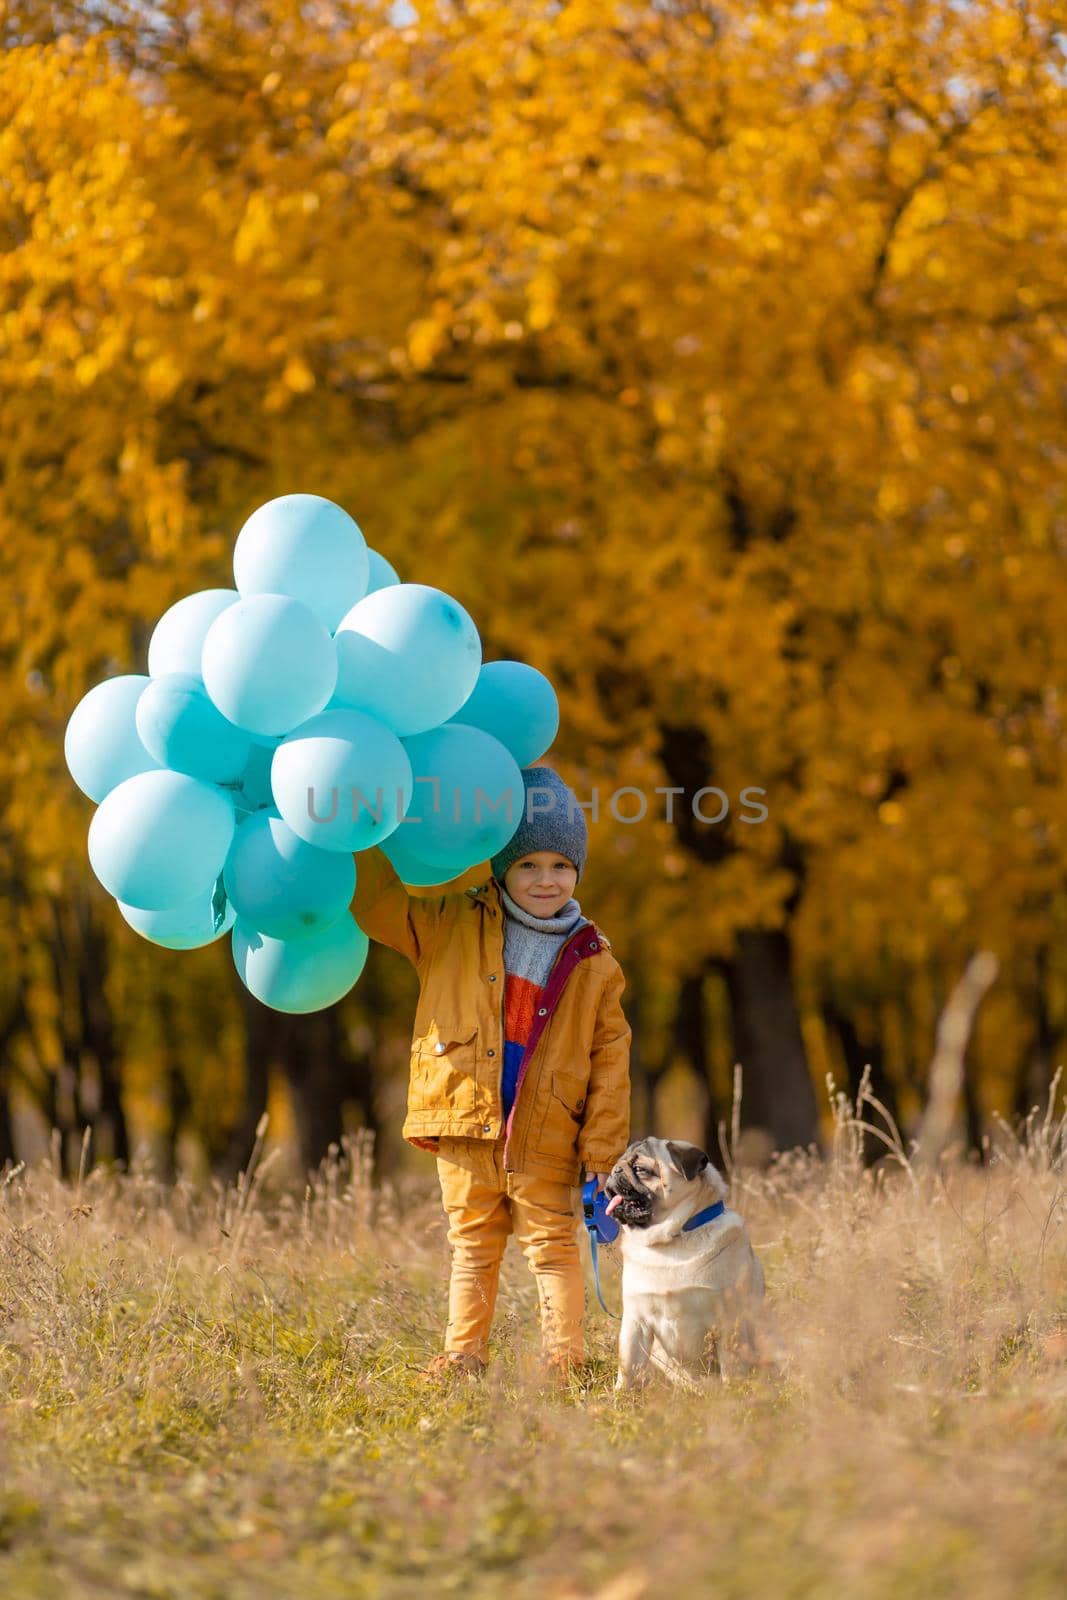 A little boy with an armful of balloons and a pug dog walks in the autumn park. Yellow trees and blue balls. Stylish child. Happy childhood by Try_my_best